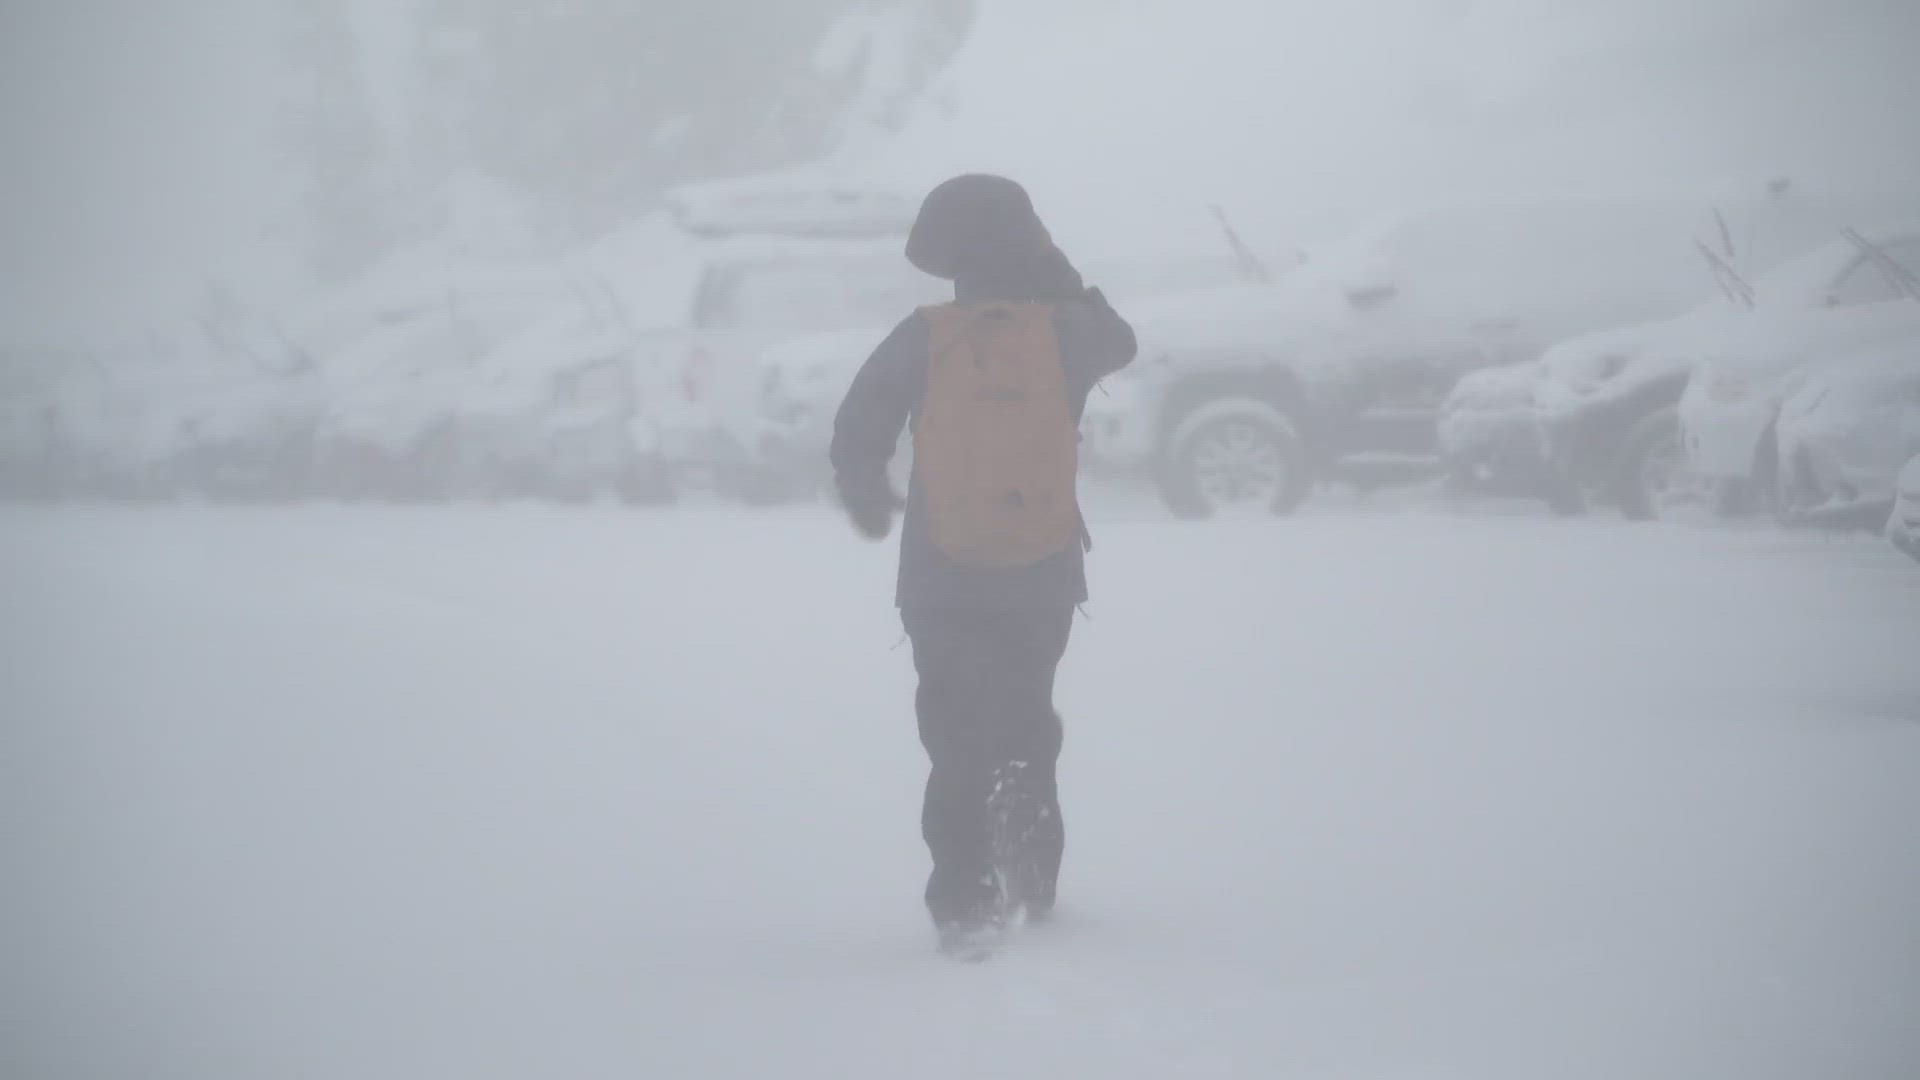 Truckee braces for the blizzard as potentially deadly conditions move into the Sierra